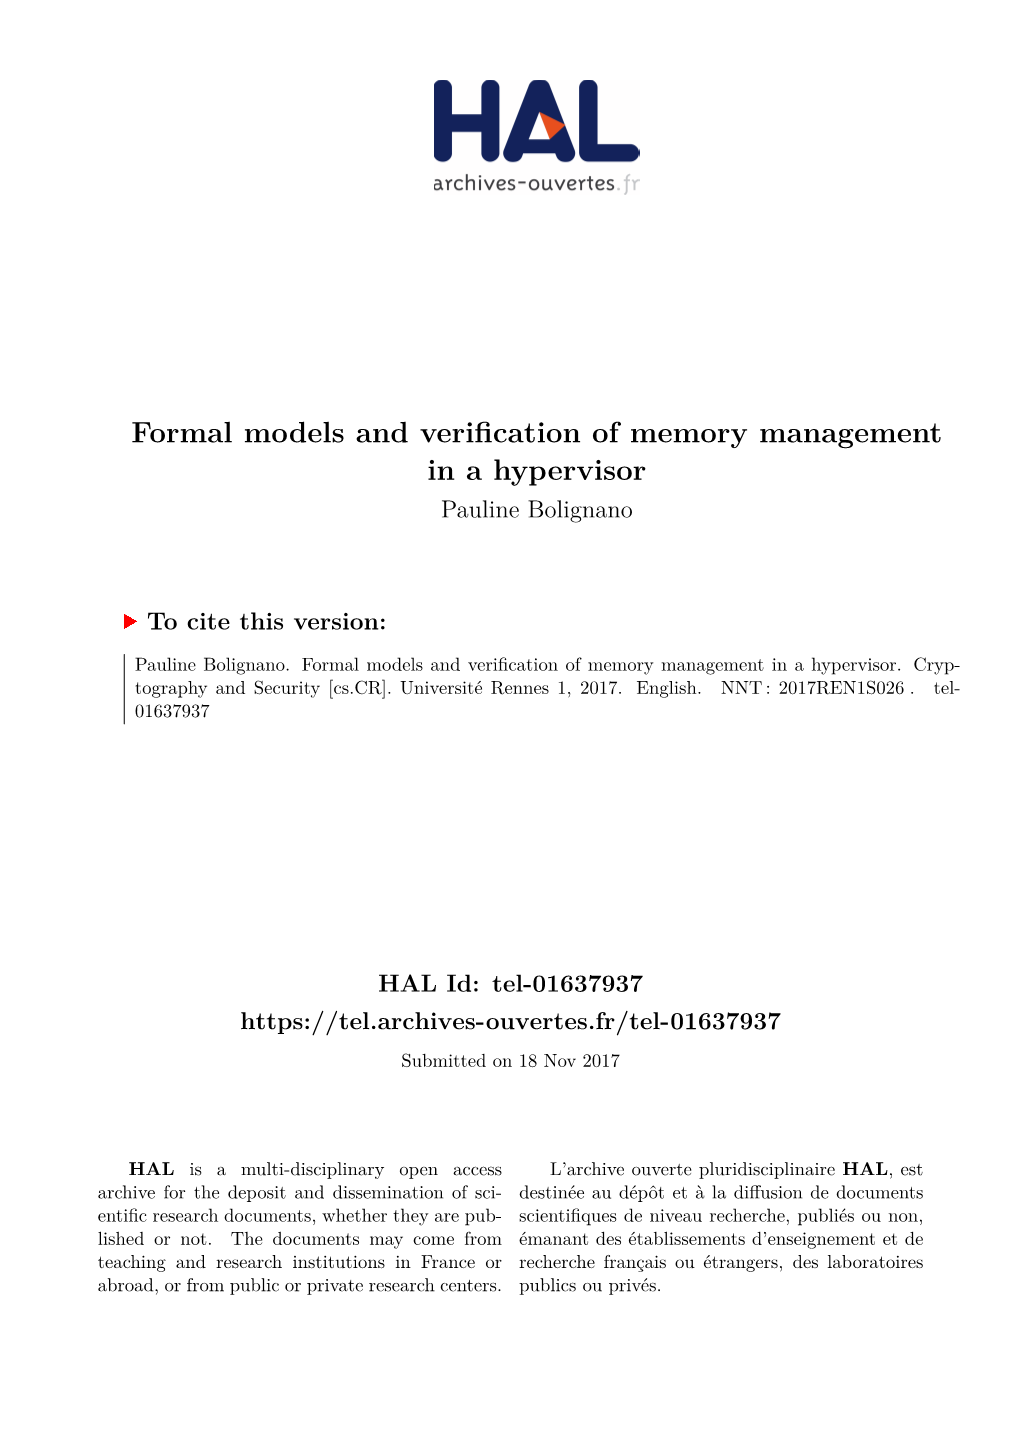 Formal Models and Verification of Memory Management in a Hypervisor Pauline Bolignano